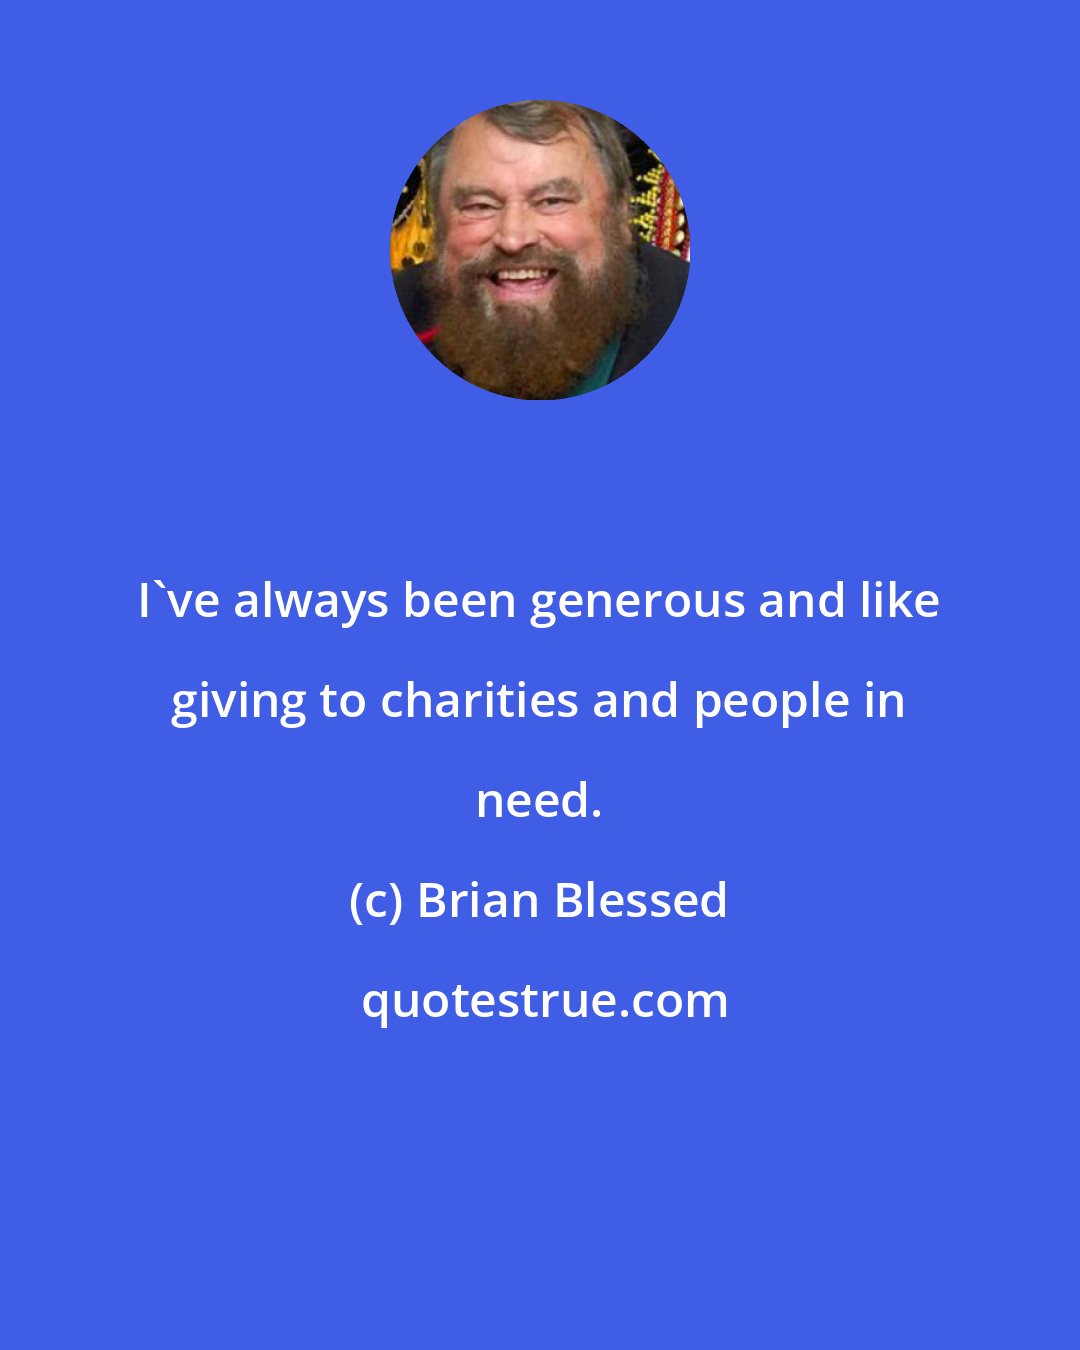 Brian Blessed: I've always been generous and like giving to charities and people in need.